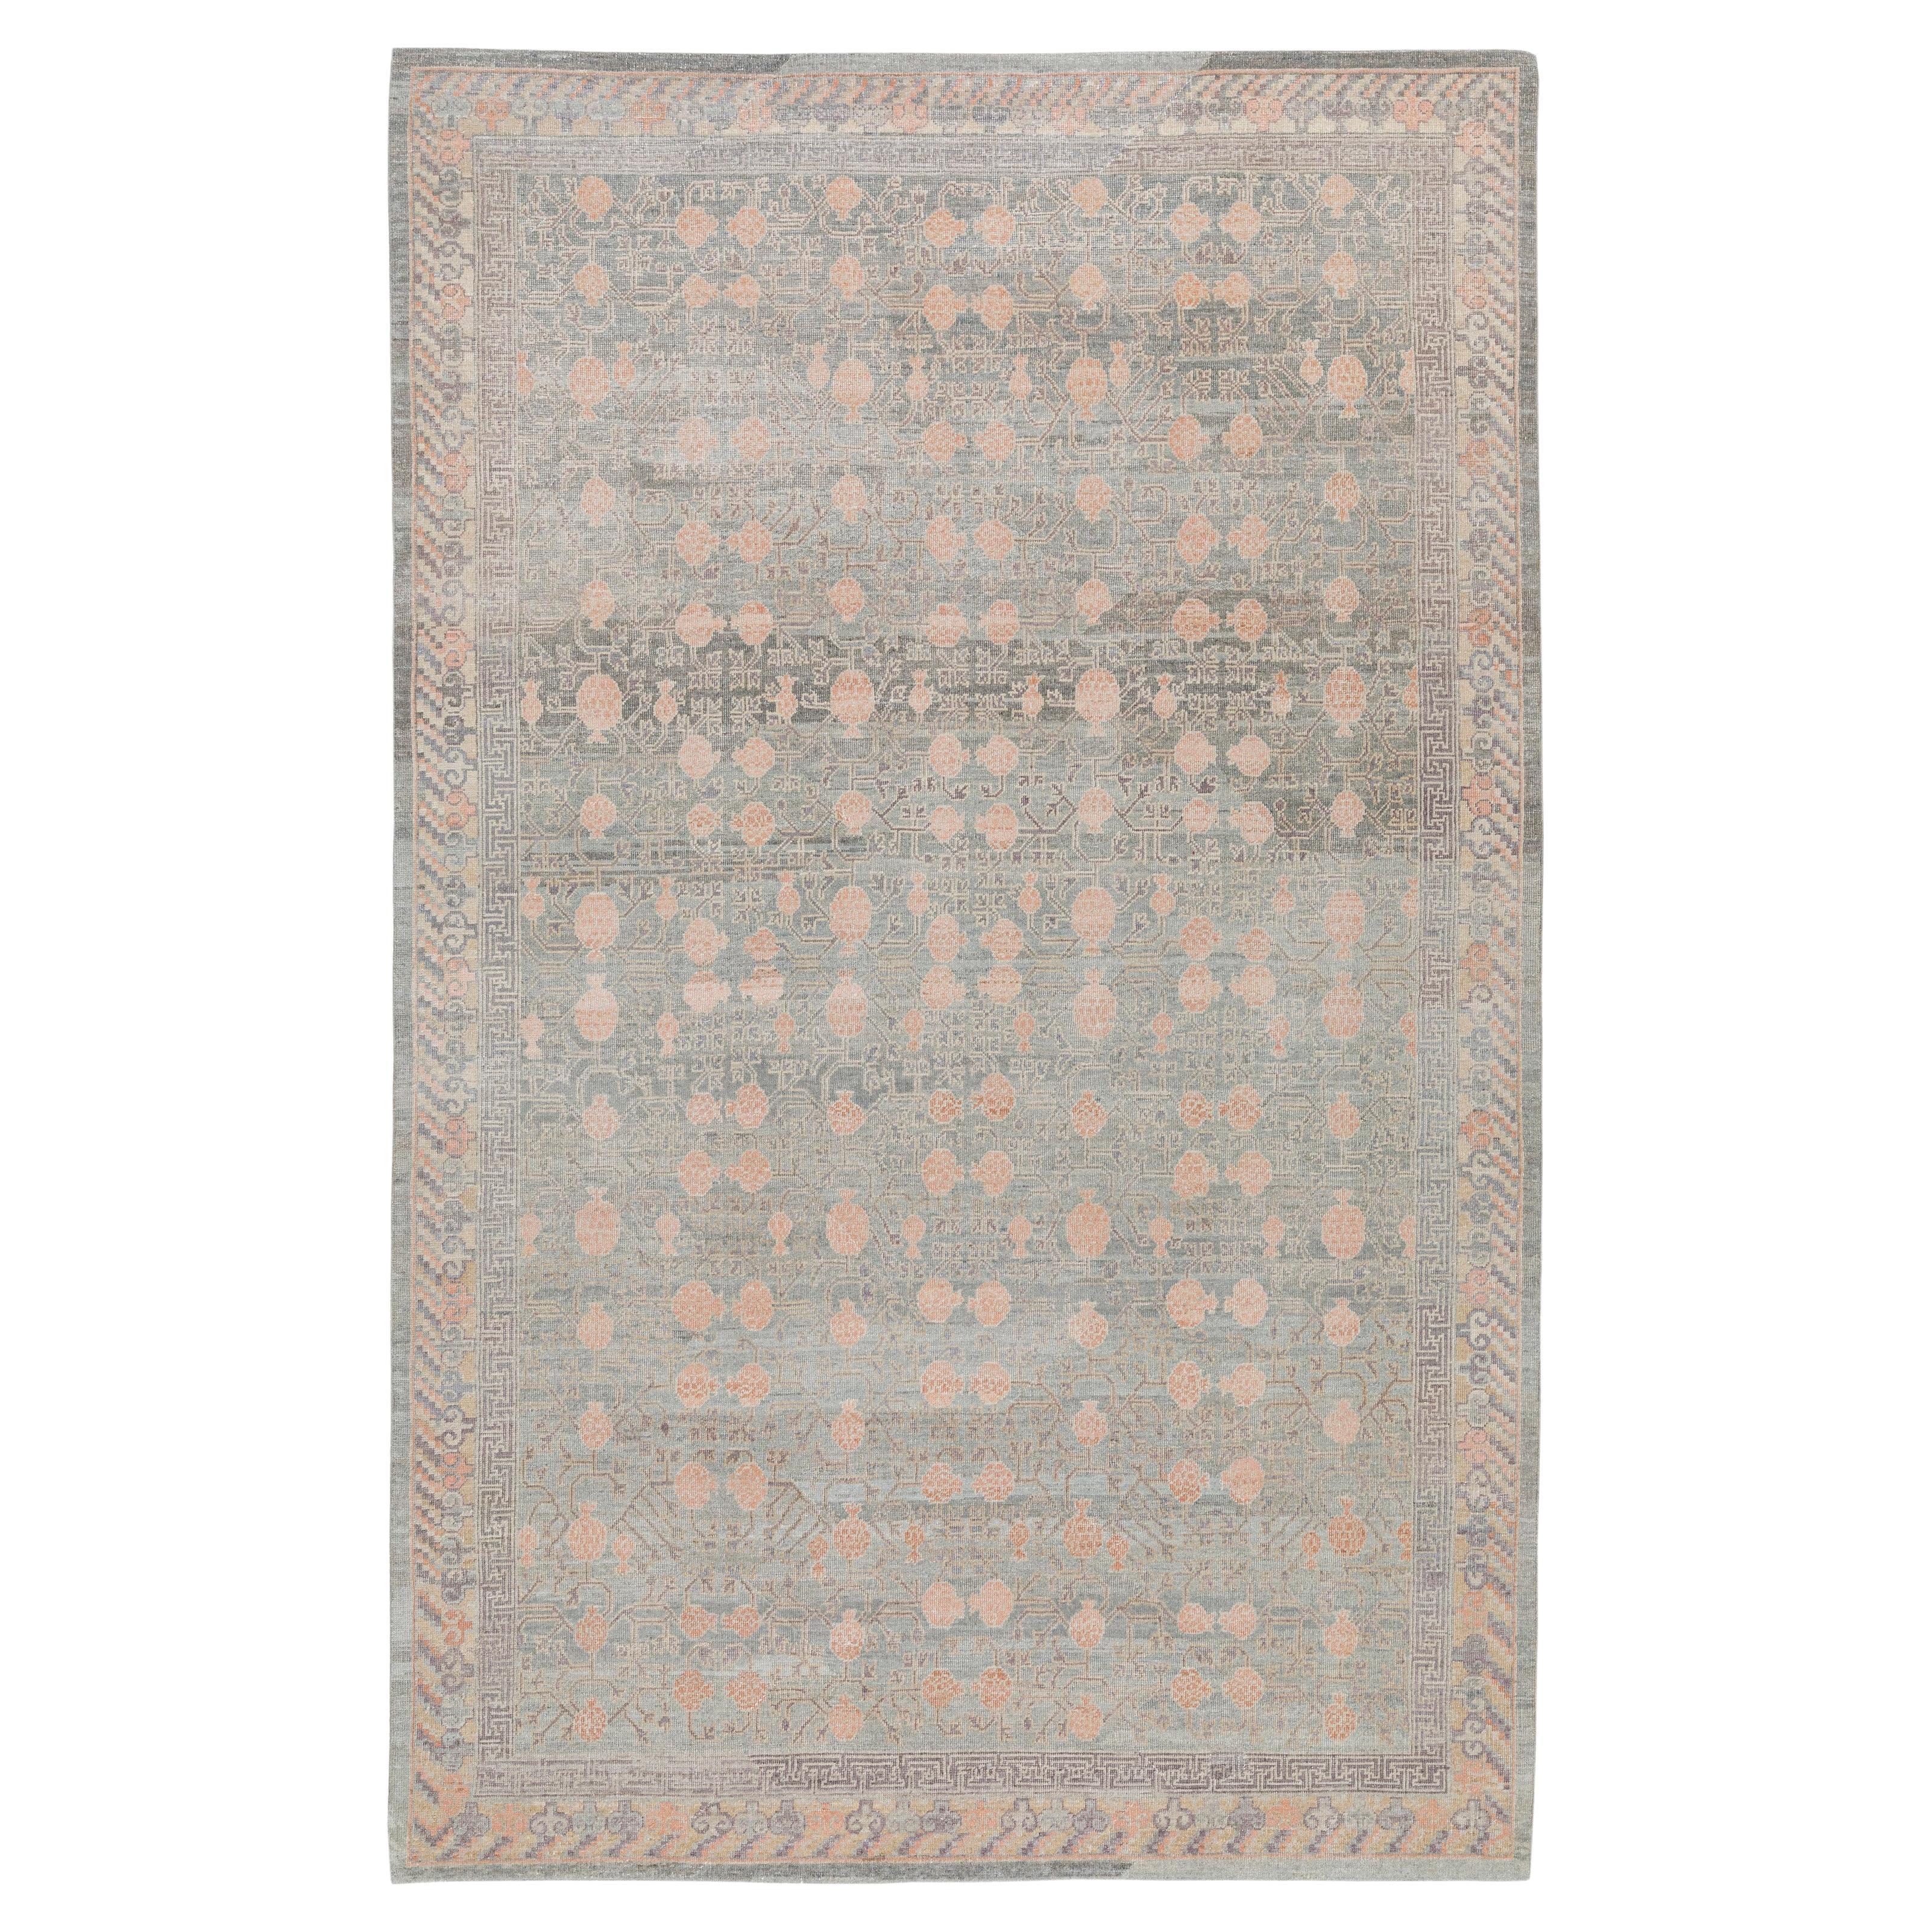 Decorative Handknotted Khotan Samarghand Style Rug with a Pomegranate Design  For Sale